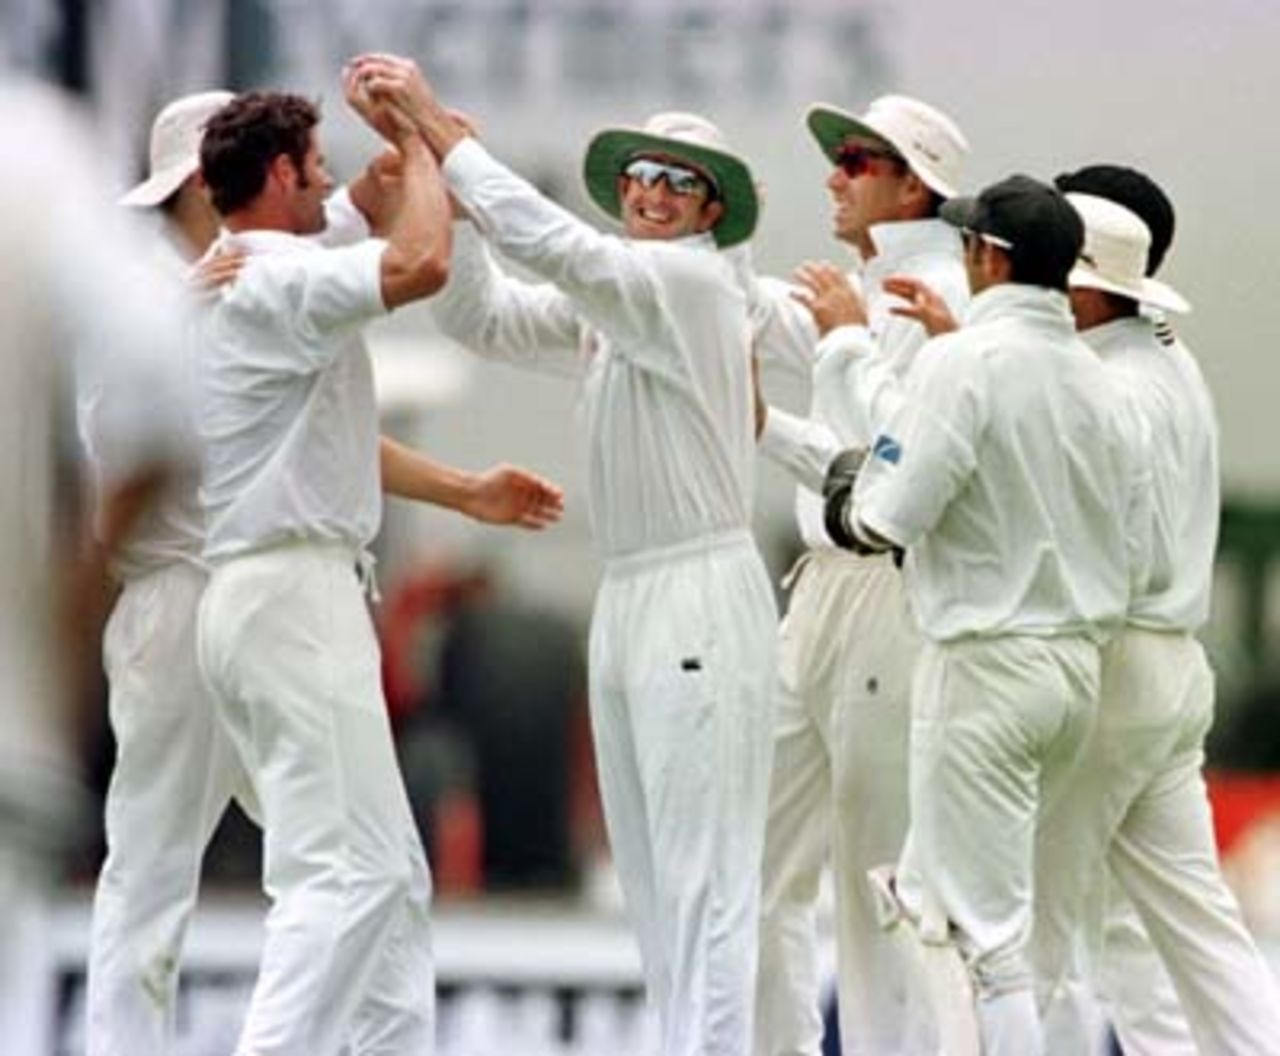 Kiwi players line up to congratulated Chris Cairns (2nd from left) after he dismissed Ricky Ponting. Australia v New Zealand 2nd Test, Day Three, at the WACA, Perth, Thursday November 22nd 1997